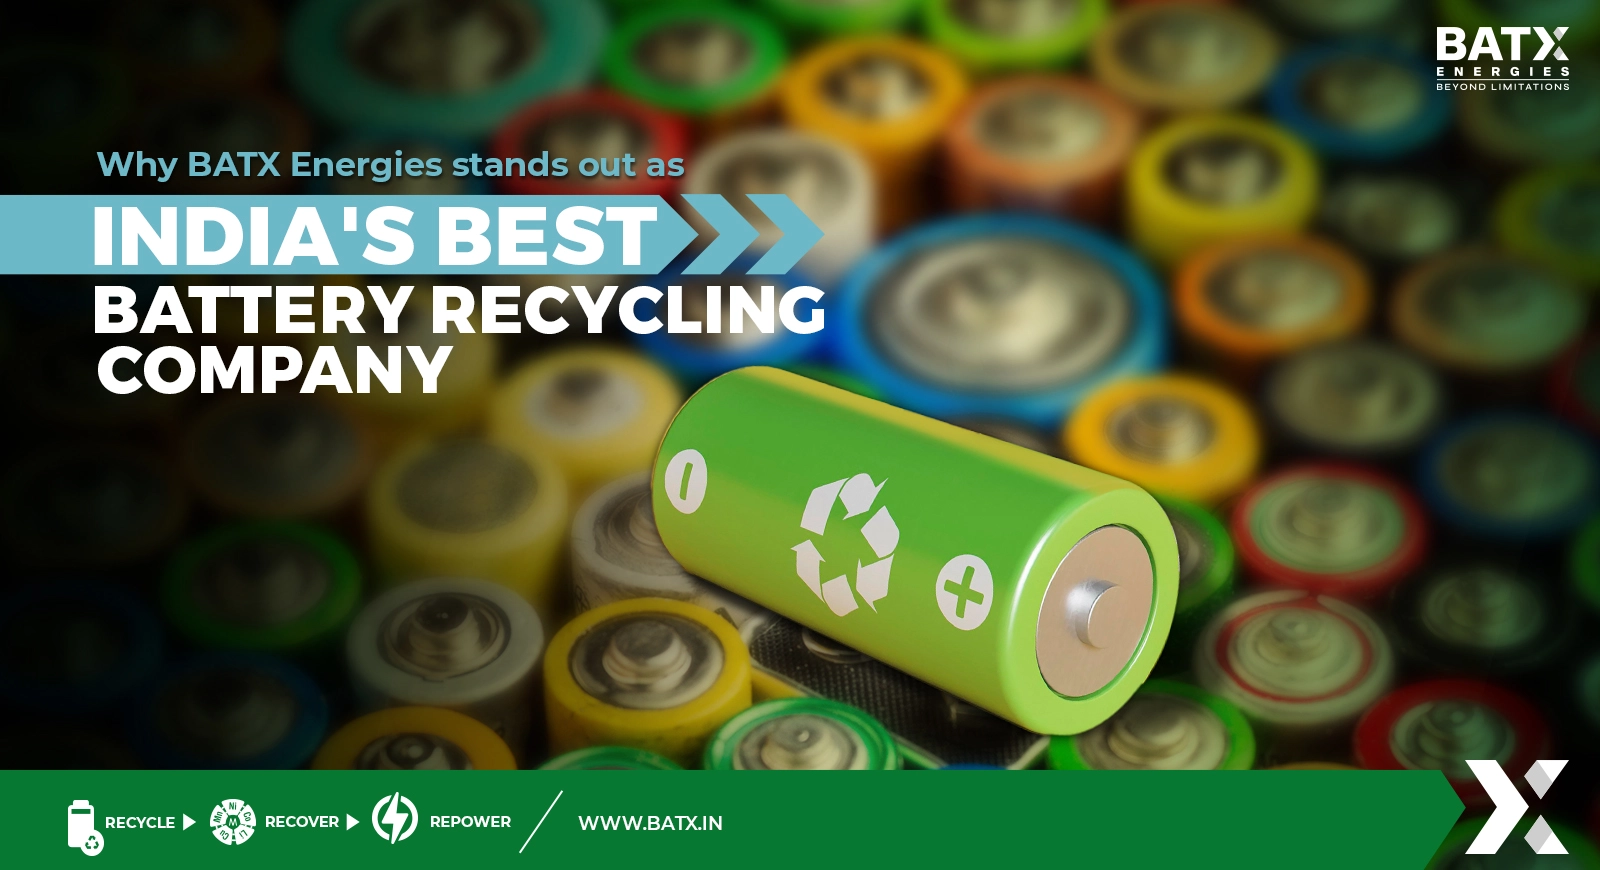 Why BATX Energies stands out as India's best battery recycling company